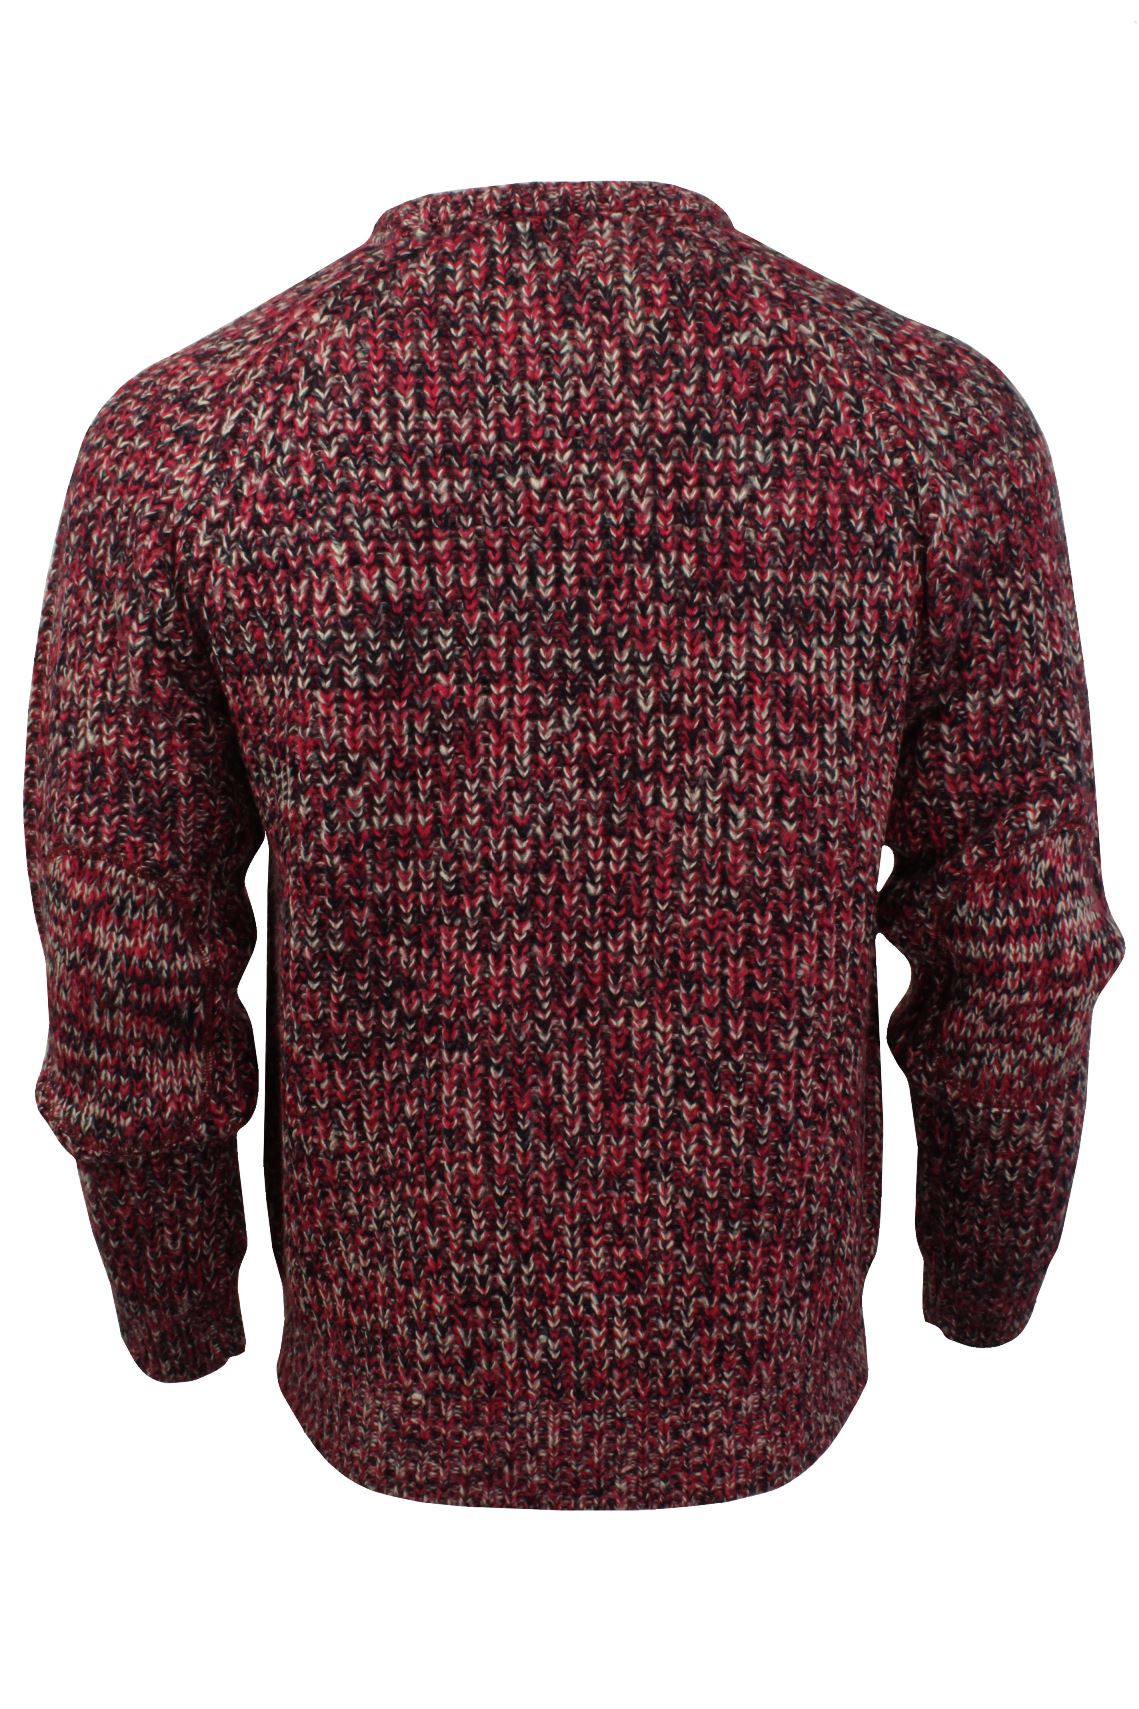 Mens Twist Crew Neck Jumper by Xact Long Sleeved (Red)-3